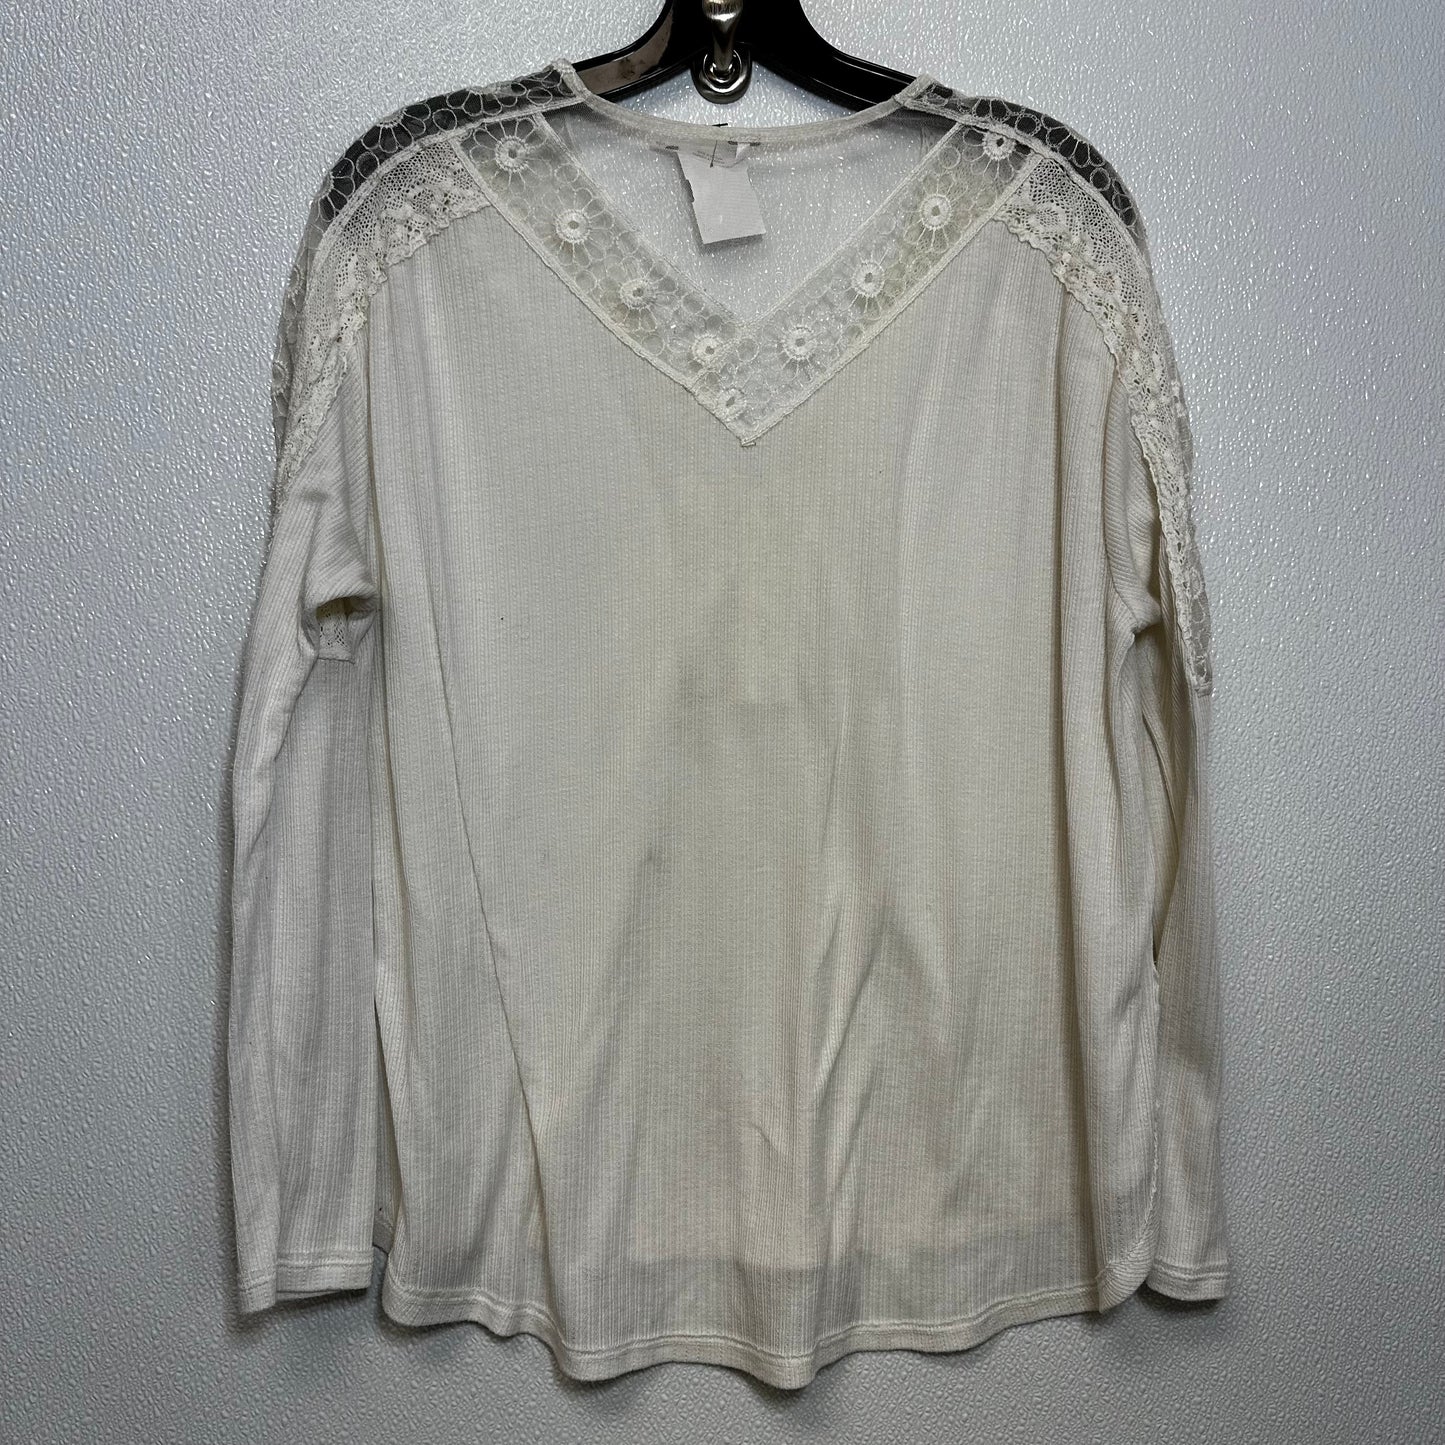 Ivory Top Long Sleeve Free People, Size S